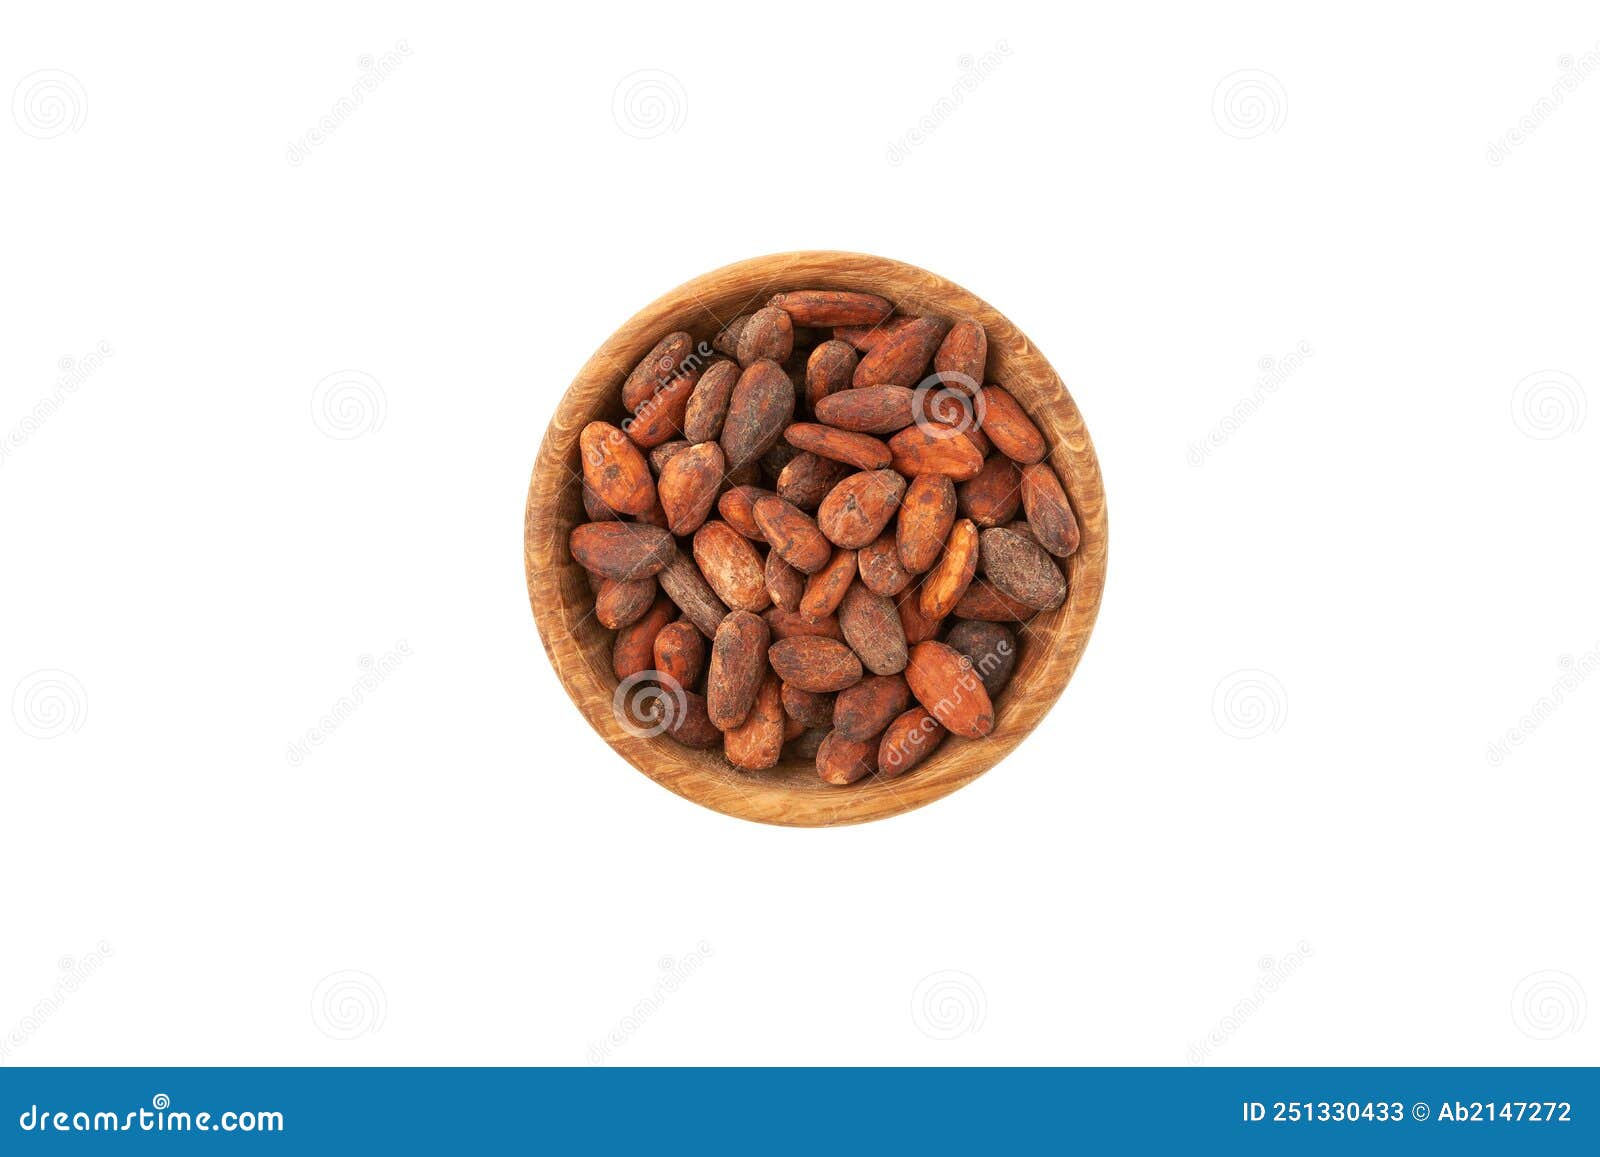 semillas de cacao tostadas in wooden bowl on white background, top view